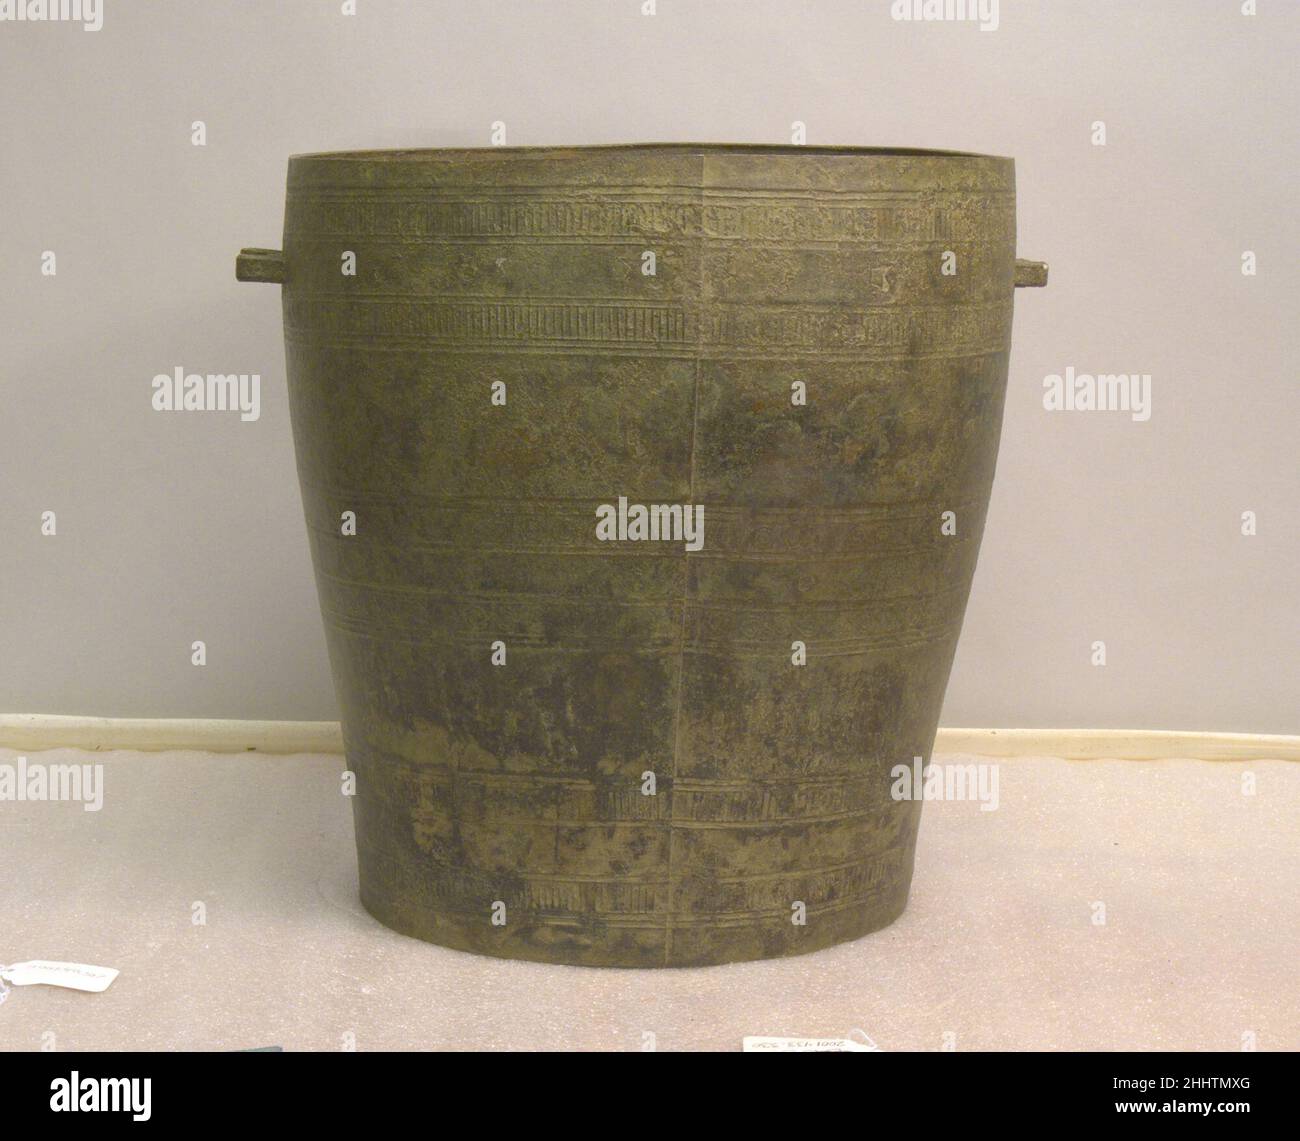 Large Situla 500 B.C.–A.D. 300 Vietnam (North). Large Situla. Vietnam (North). 500 B.C.–A.D. 300. Bronze. Bronze and Iron Age period, Dongson culture. Metalwork Stock Photo